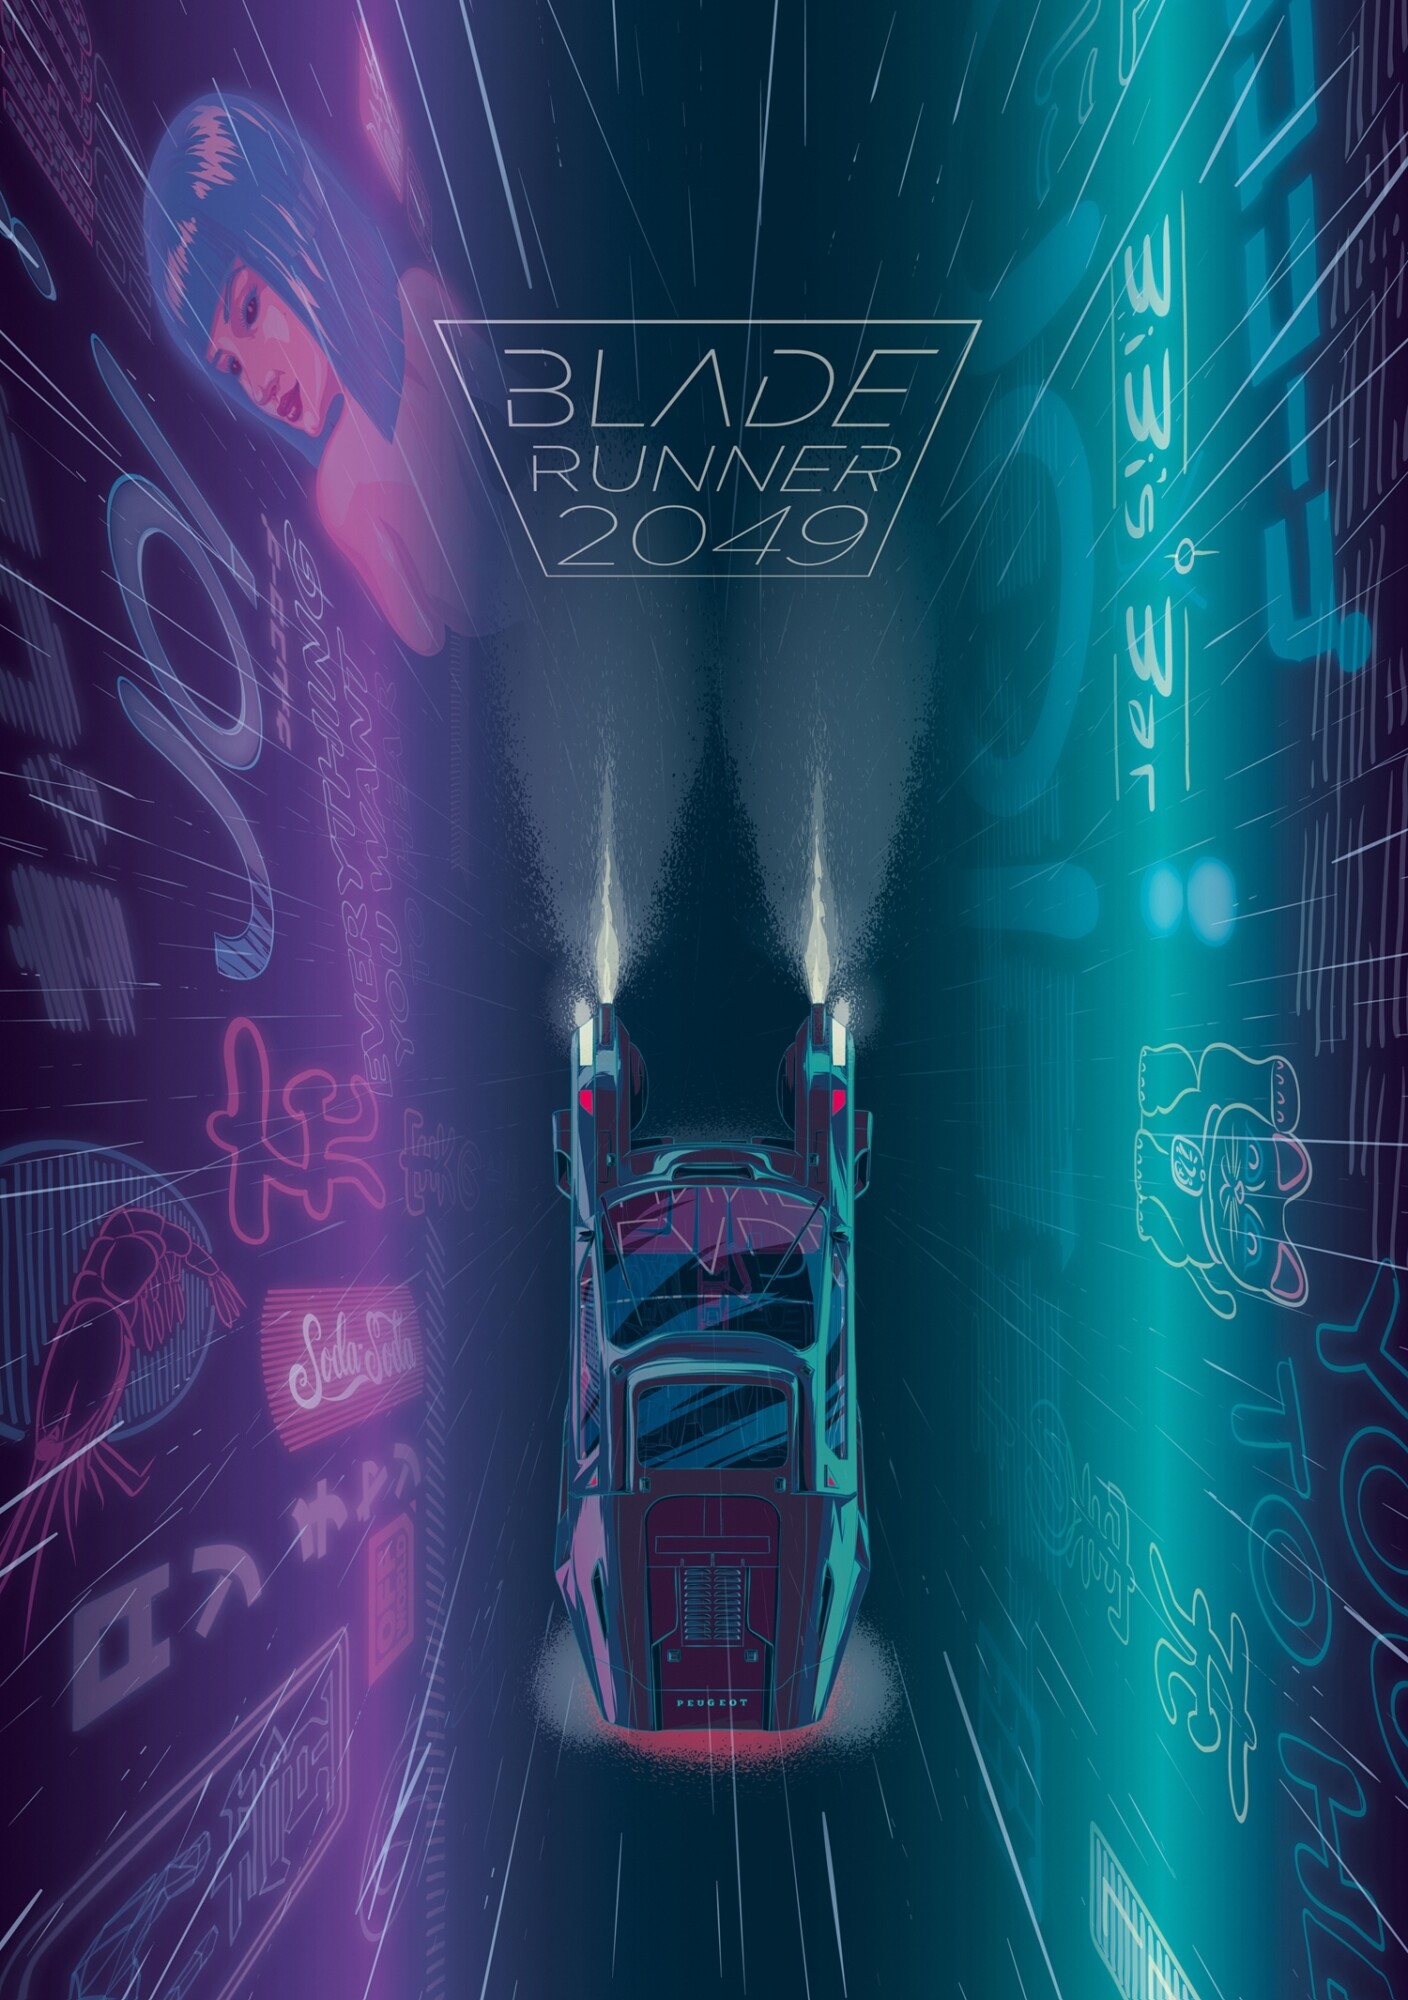 Blade Runner 2049 Creative Brief: An Interview with the Selected Artists